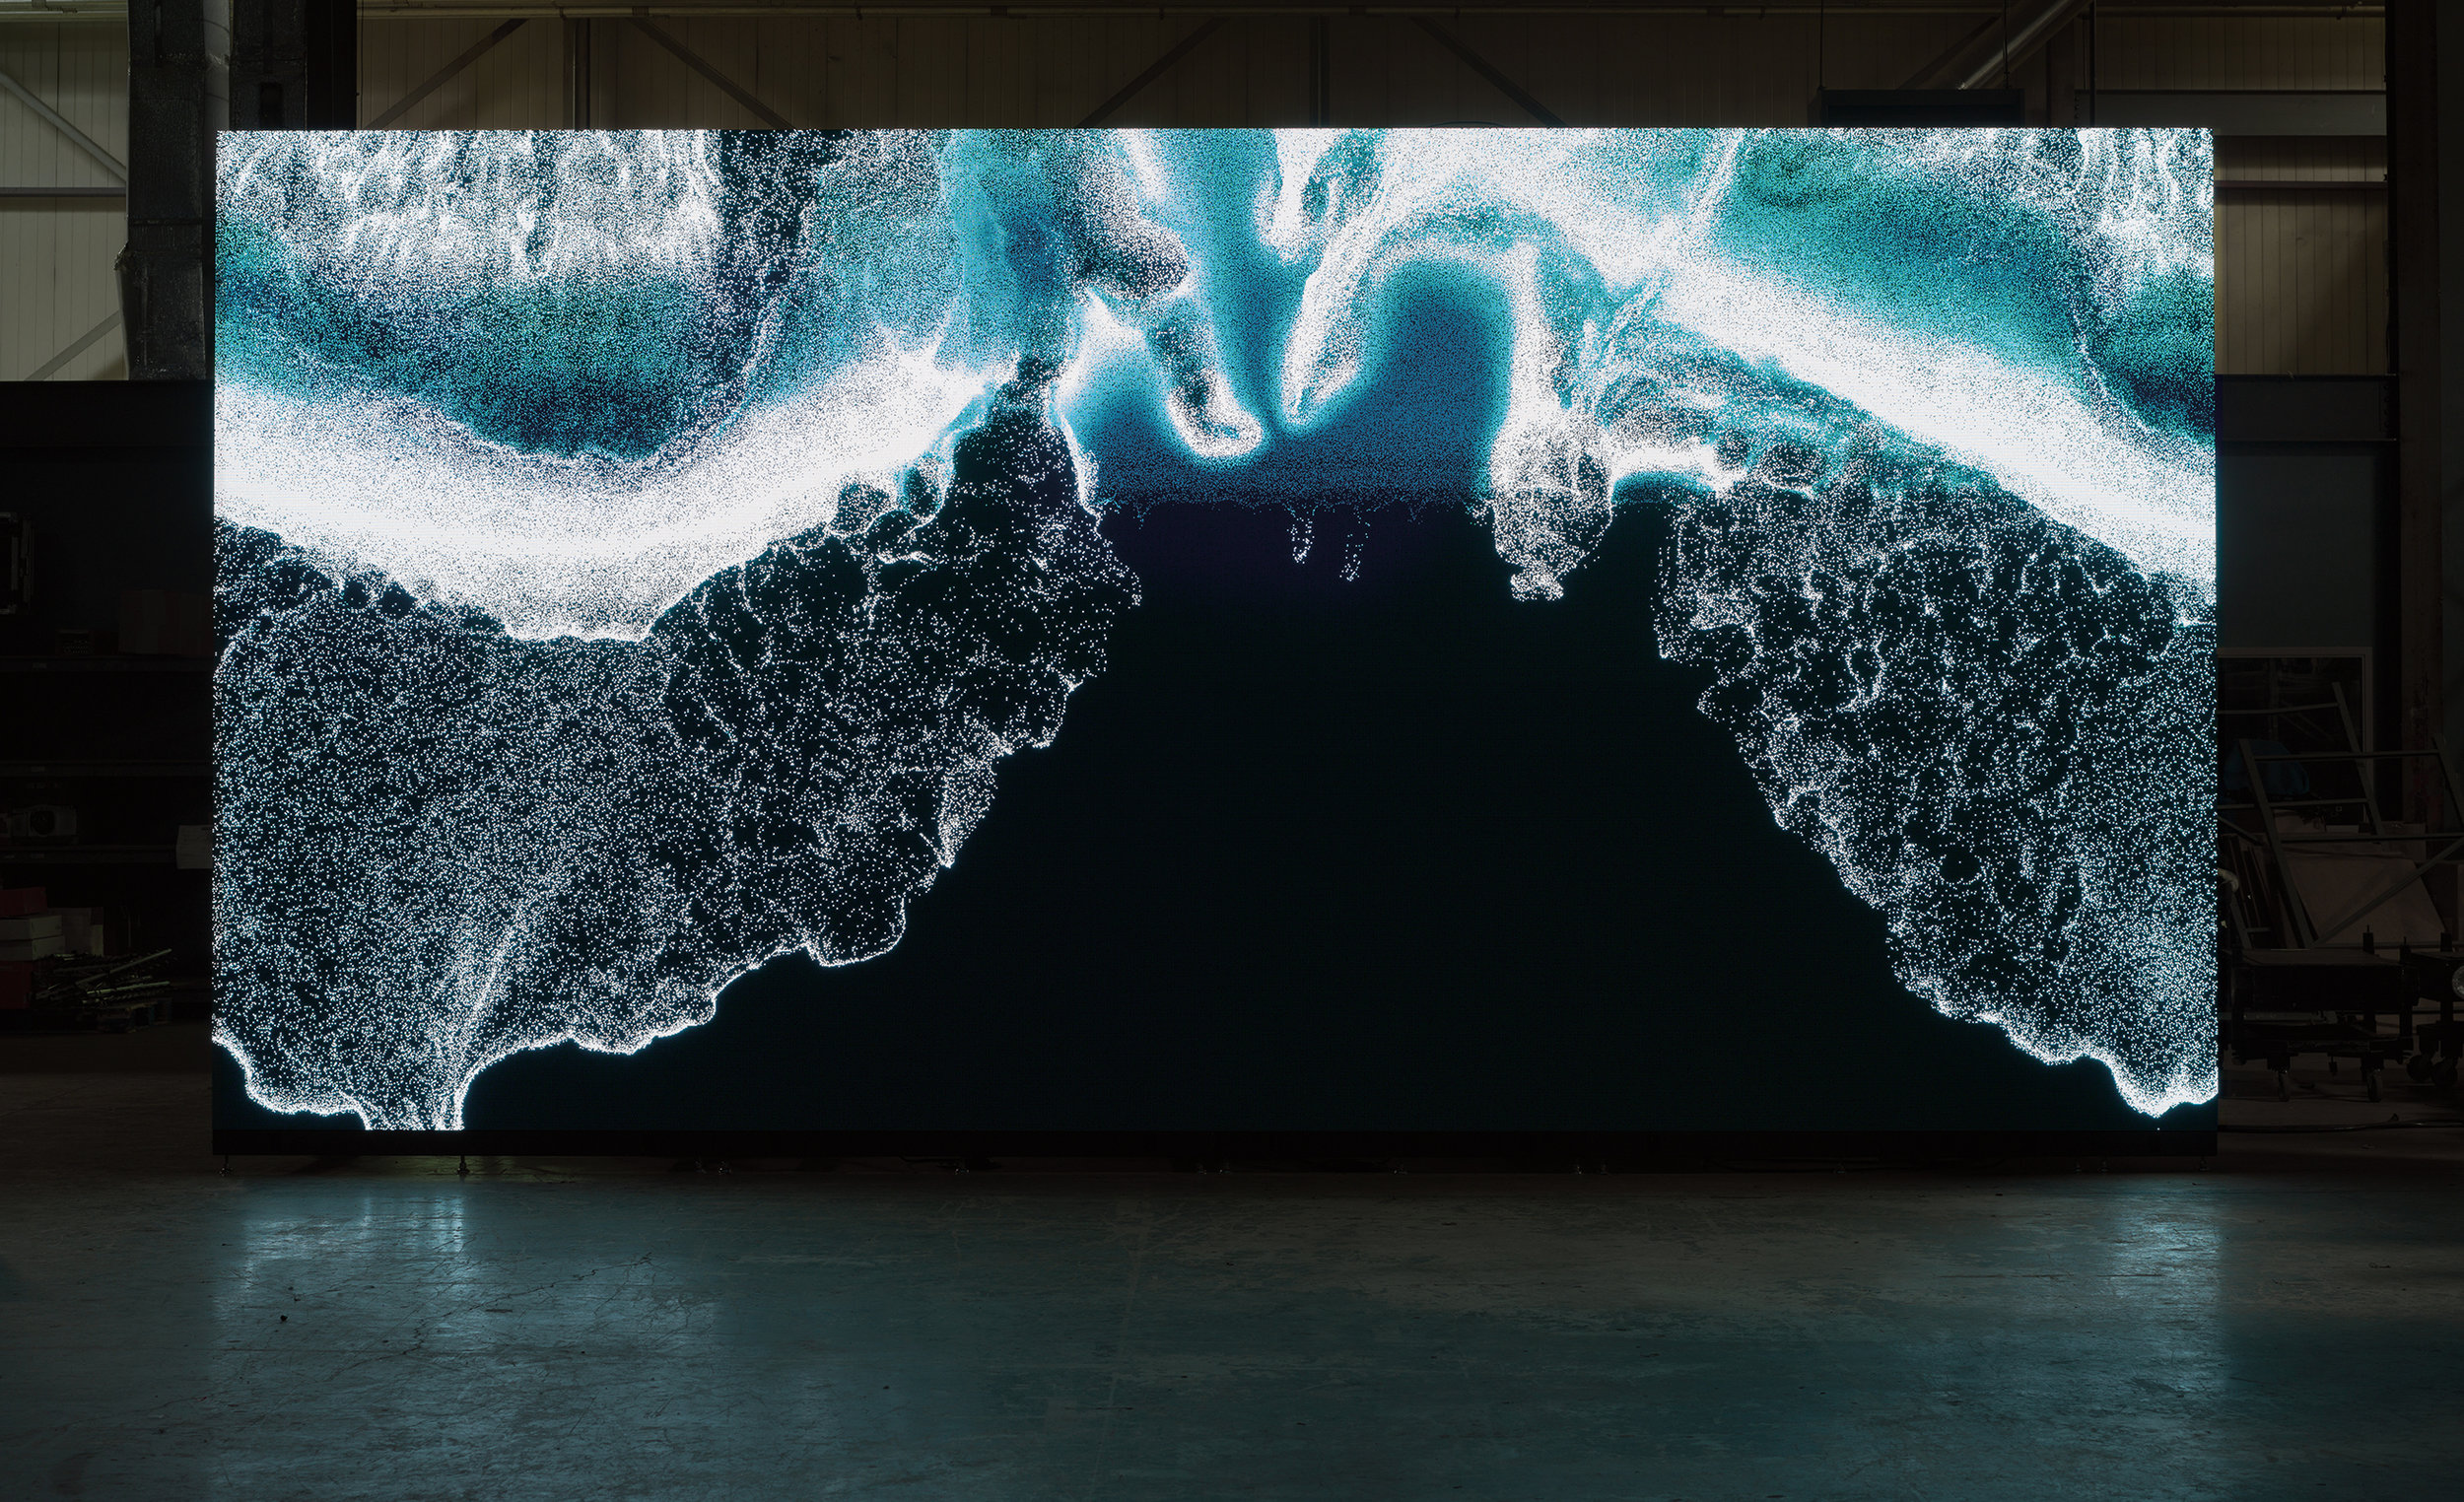 Clifford Ross’s “Digital Wave 9” displayed on LED wall_1.jpg